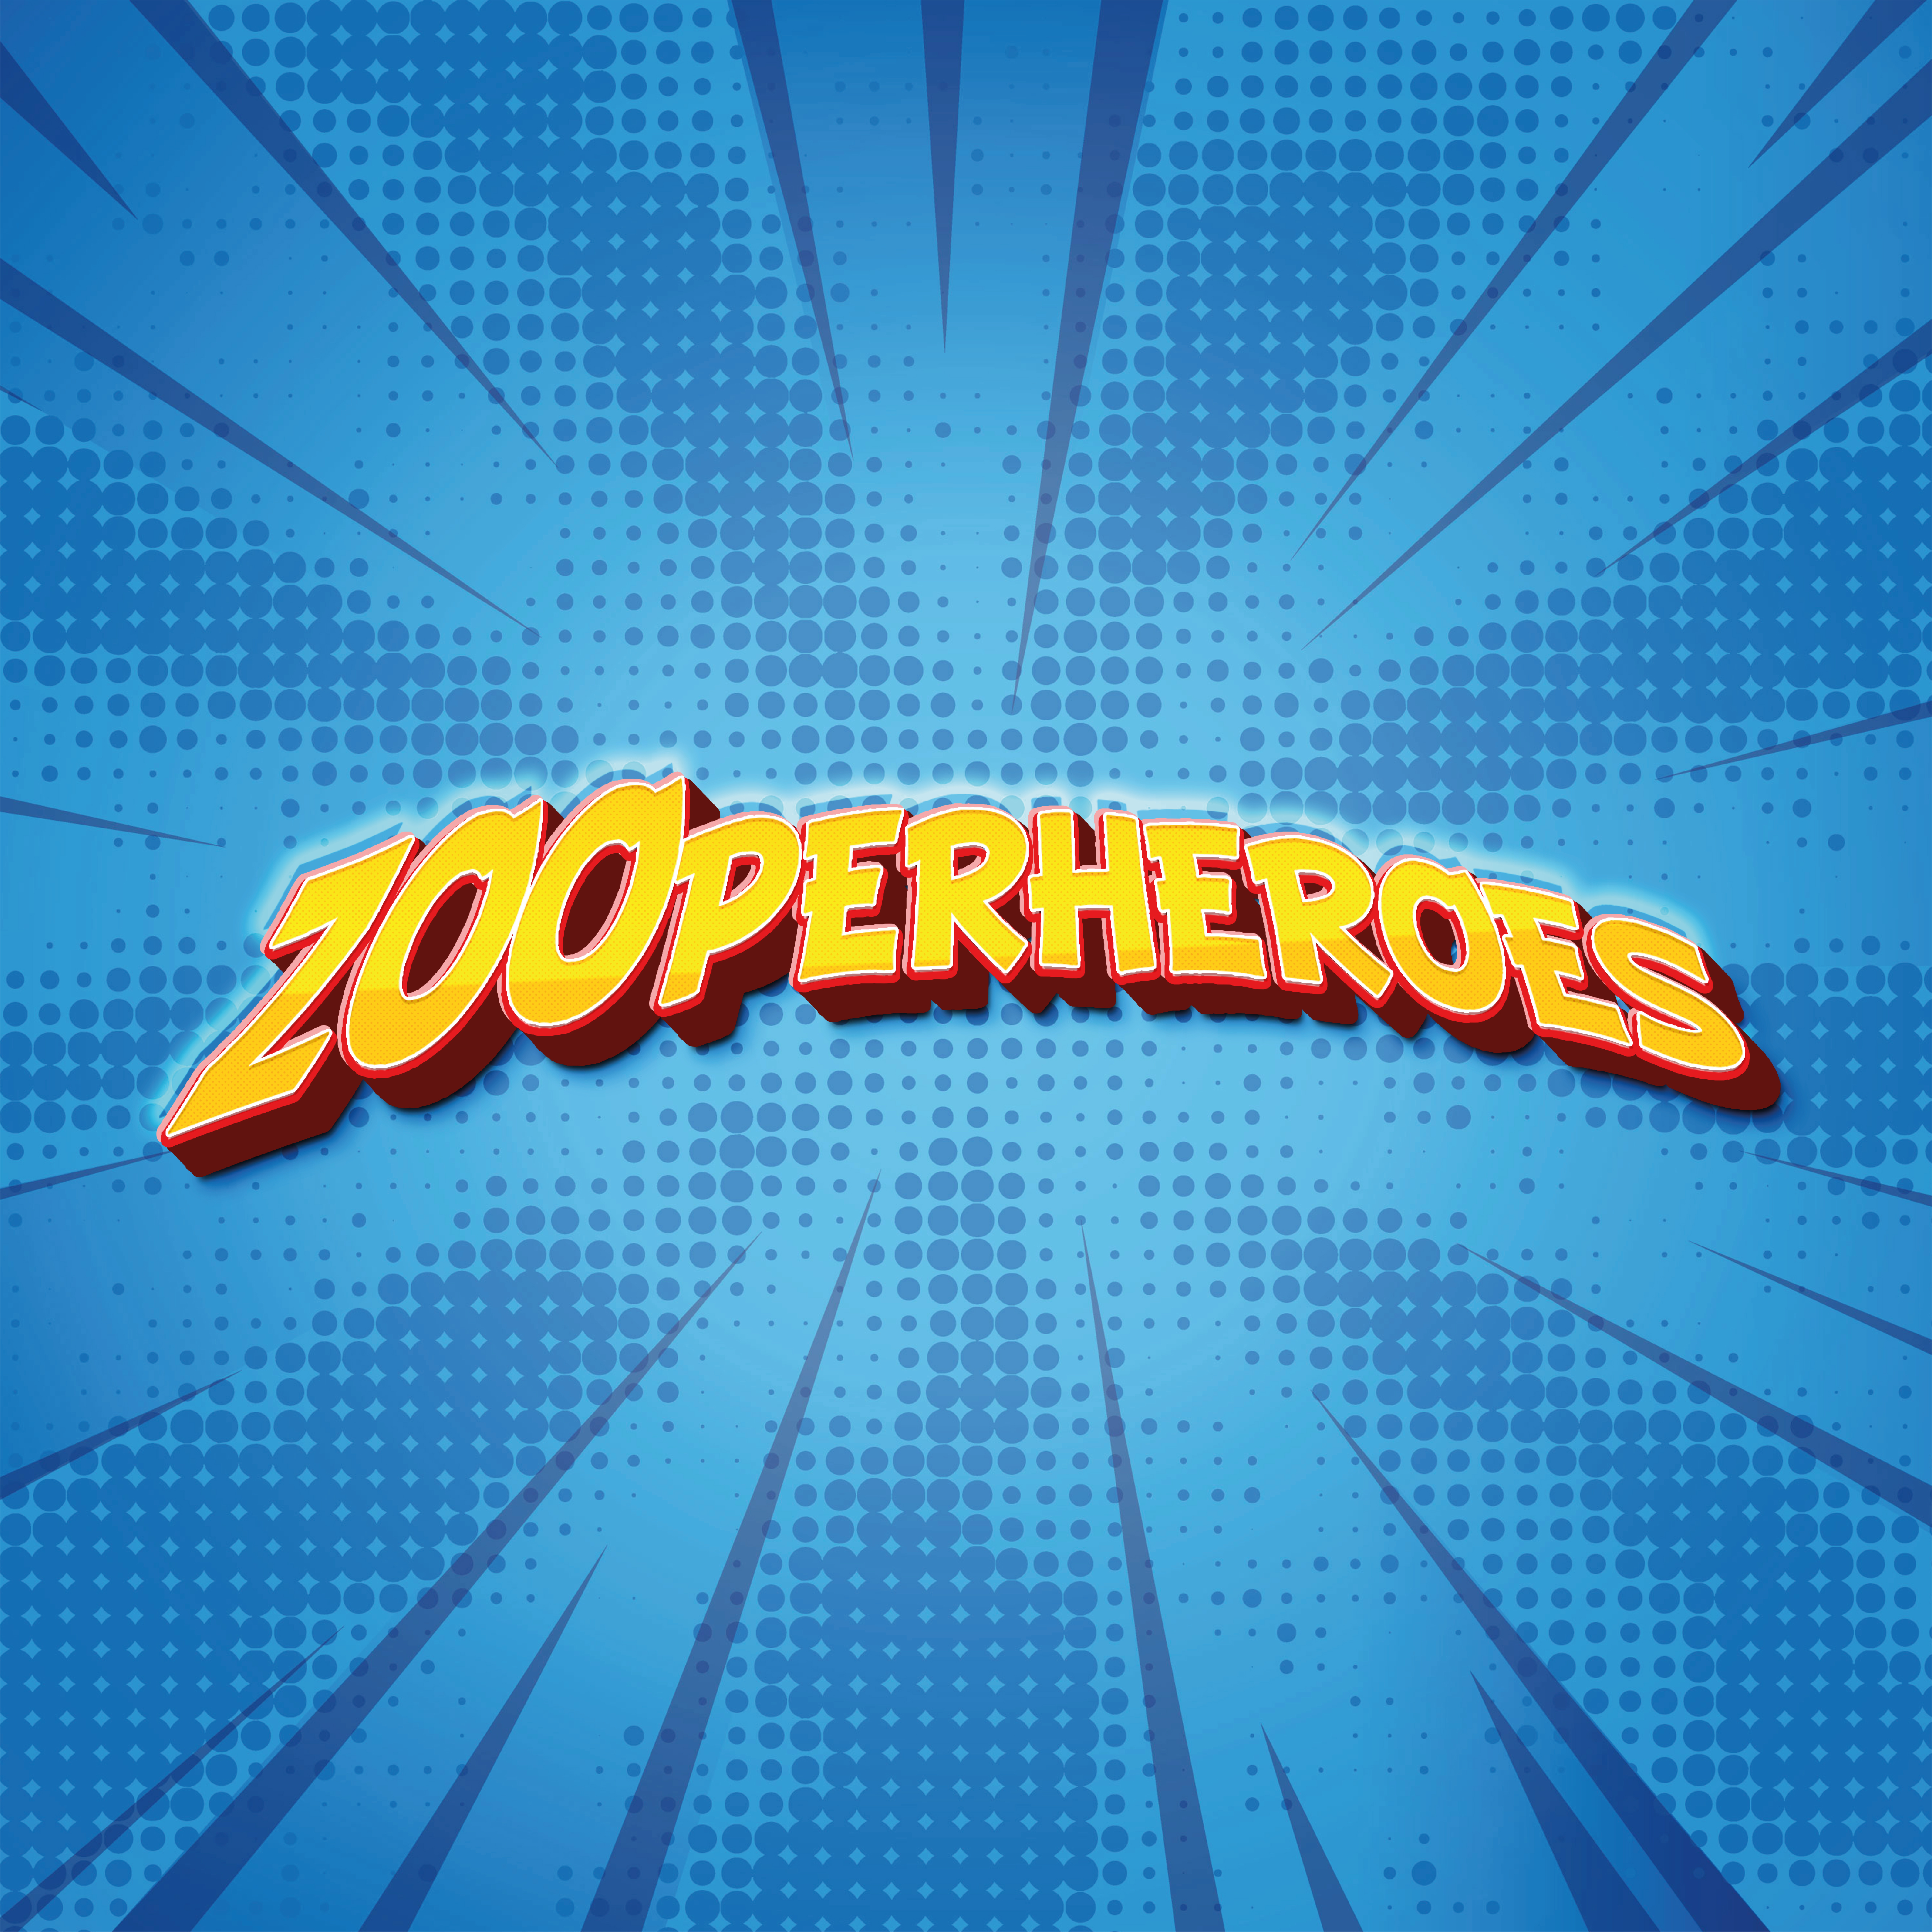 CW22 196 ENTS WEB PAGE UPDATE Zooperheroes